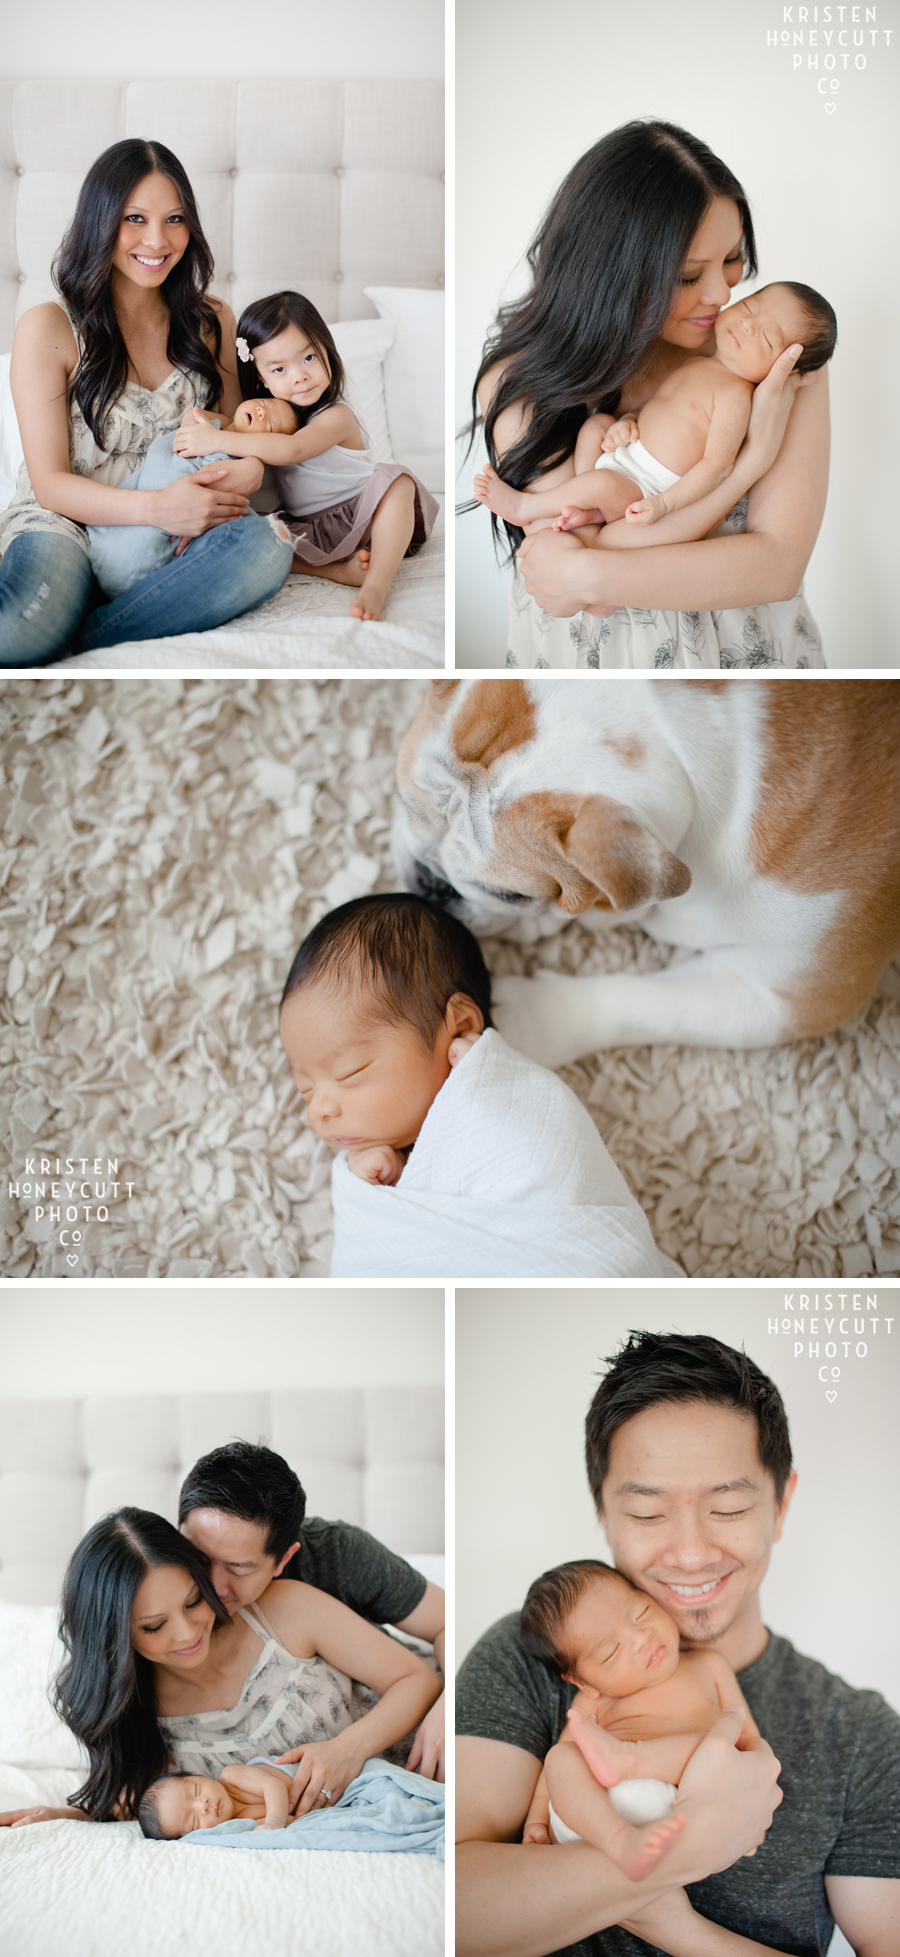 Family, sibling, and newborn portrait session with dog in Bothell Washington